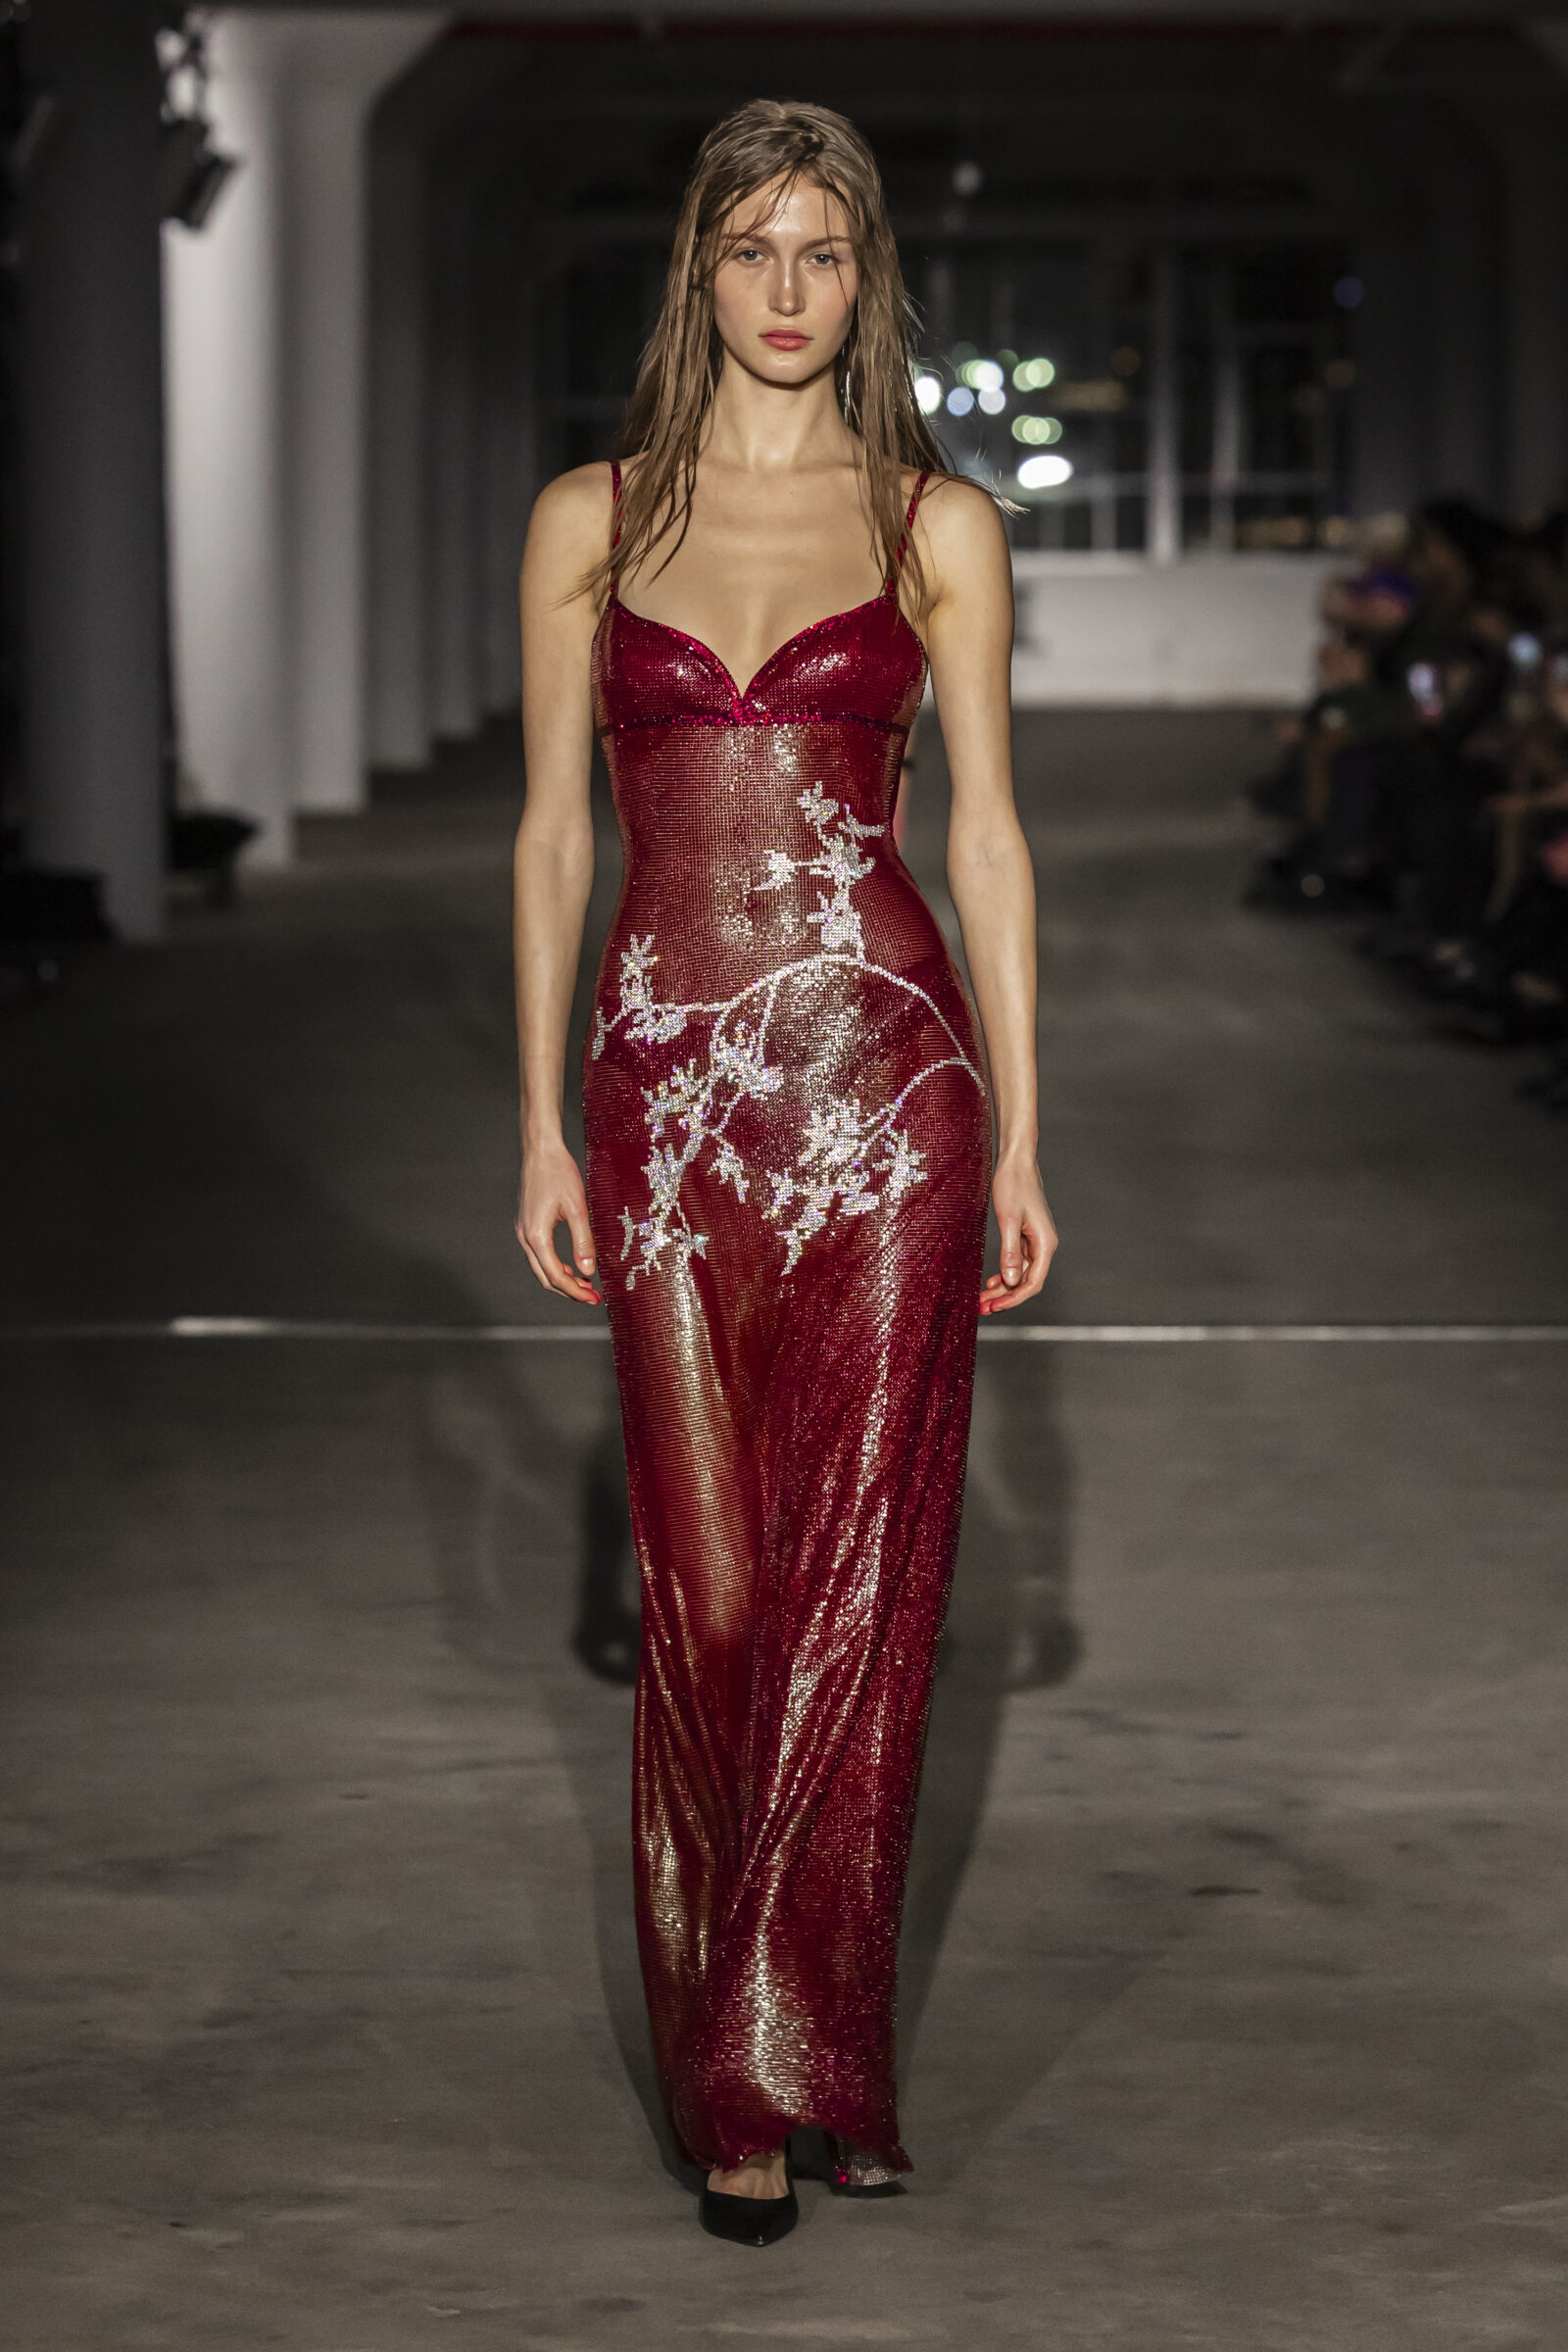 A model gracefully showcases a sparkling red sequined gown with delicate white floral accents, featuring a deep neckline and fitted silhouette, at Ludovic de Saint Sernin's AW24 collection show during New York Fashion Week.